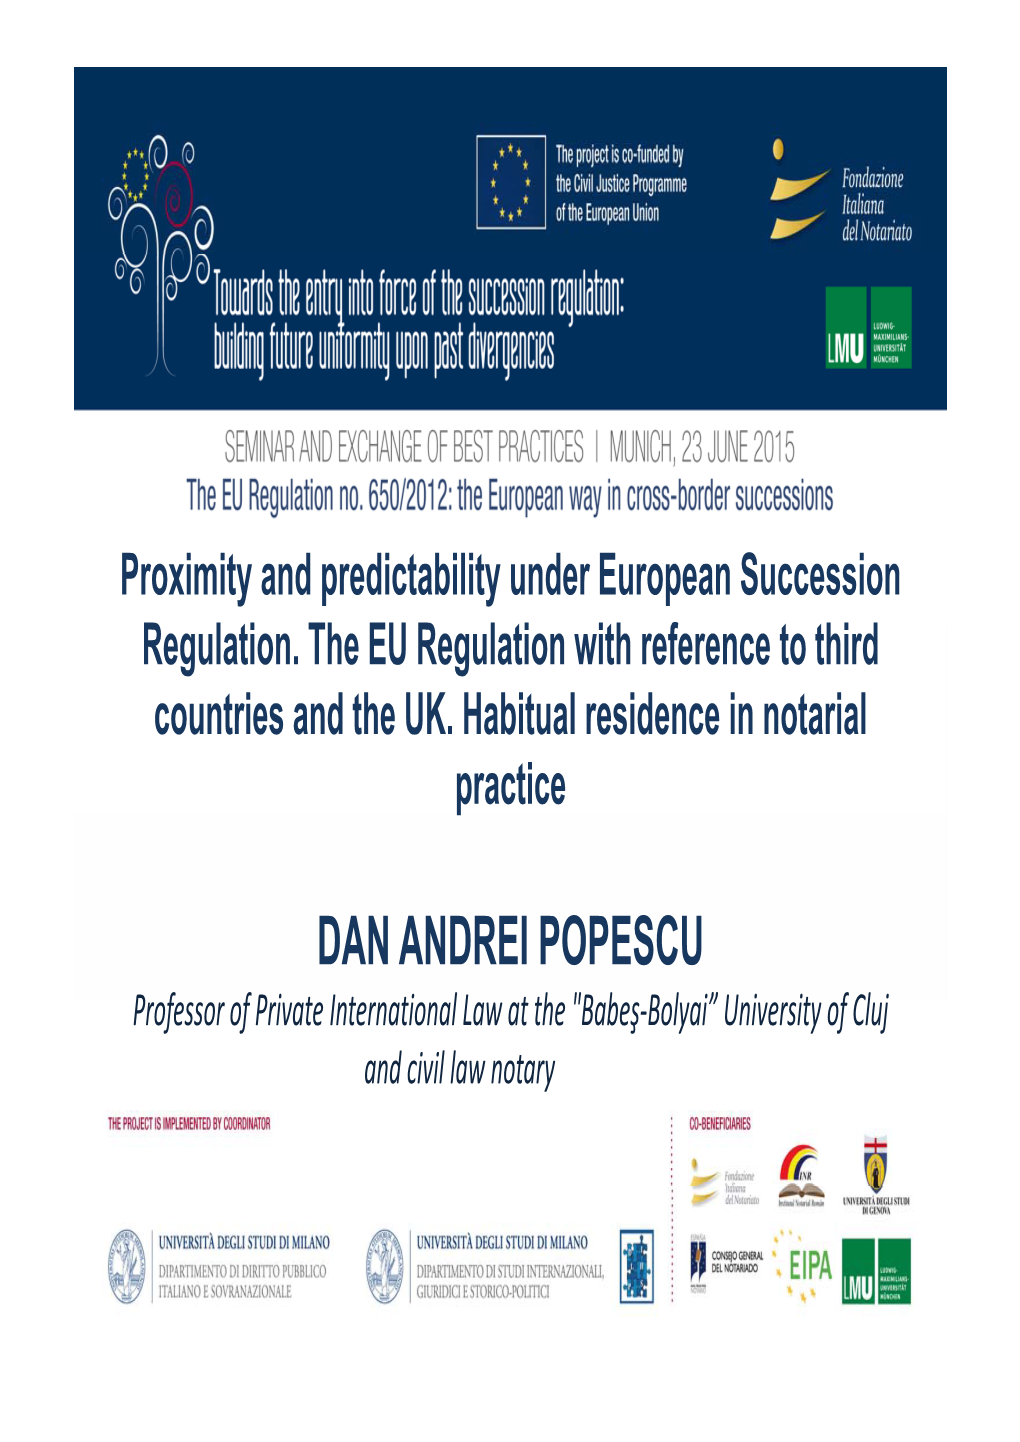 DAN ANDREI POPESCU Professor of Private International Law at the "Babeş‐Bolyai” University of Cluj and Civil Law Notary the Proximity Principle